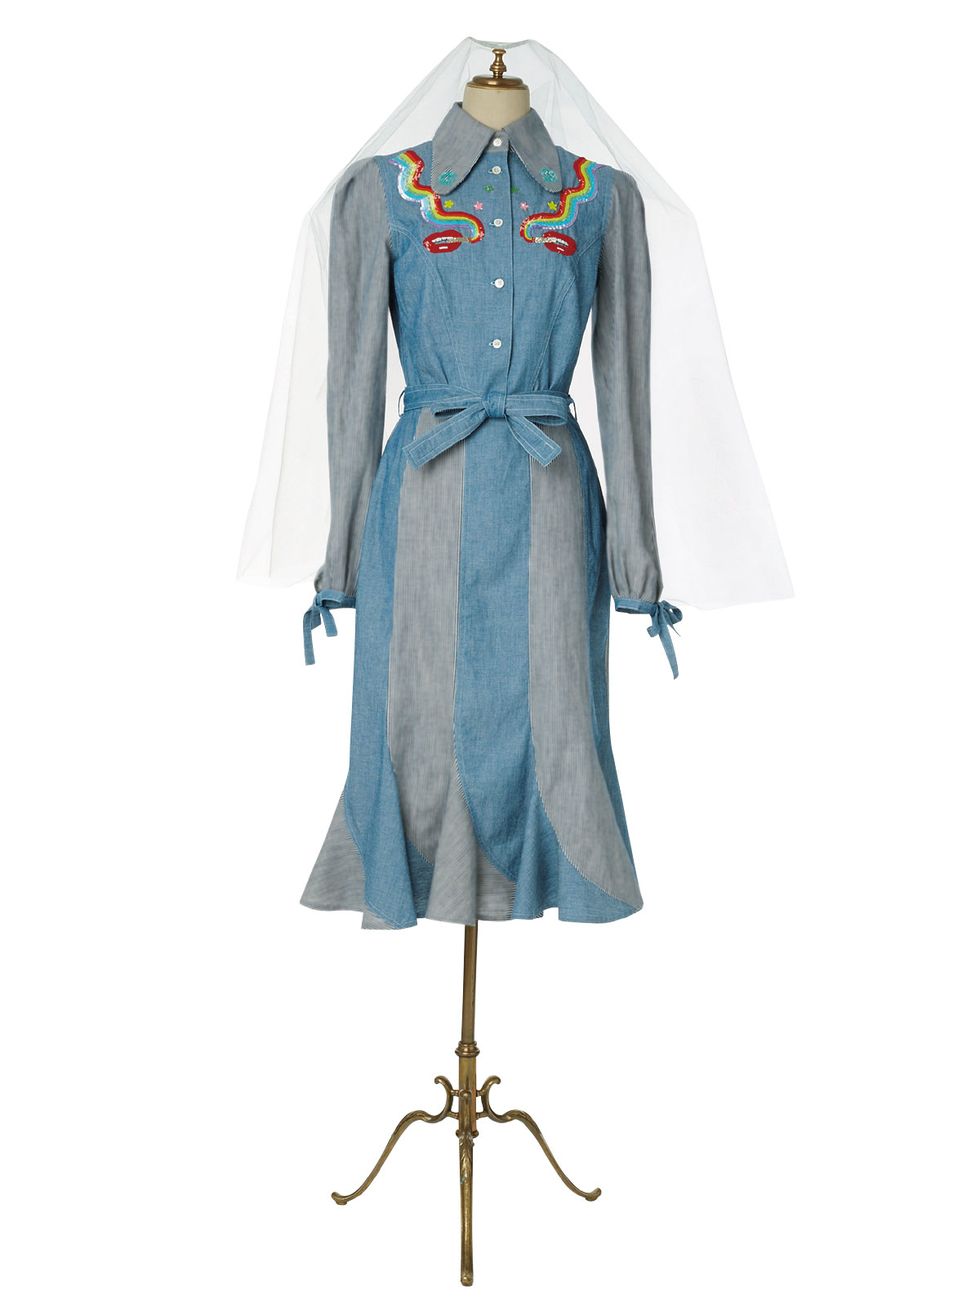 Clothing, Day dress, Blue, Outerwear, Dress, Turquoise, Sleeve, Costume, Coat, Costume design, 